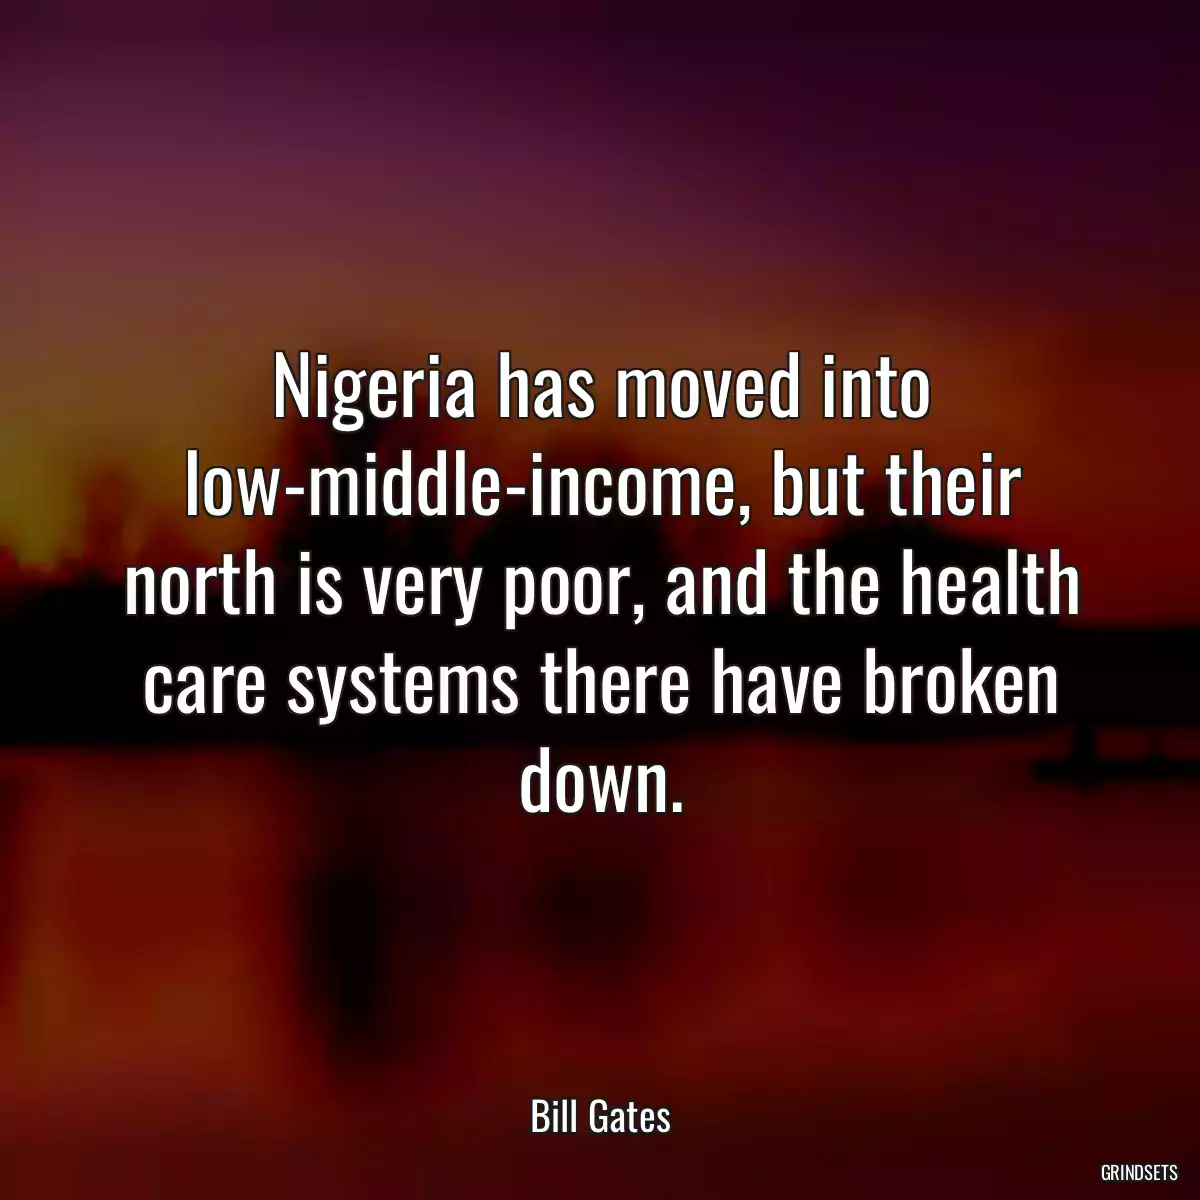 Nigeria has moved into low-middle-income, but their north is very poor, and the health care systems there have broken down.